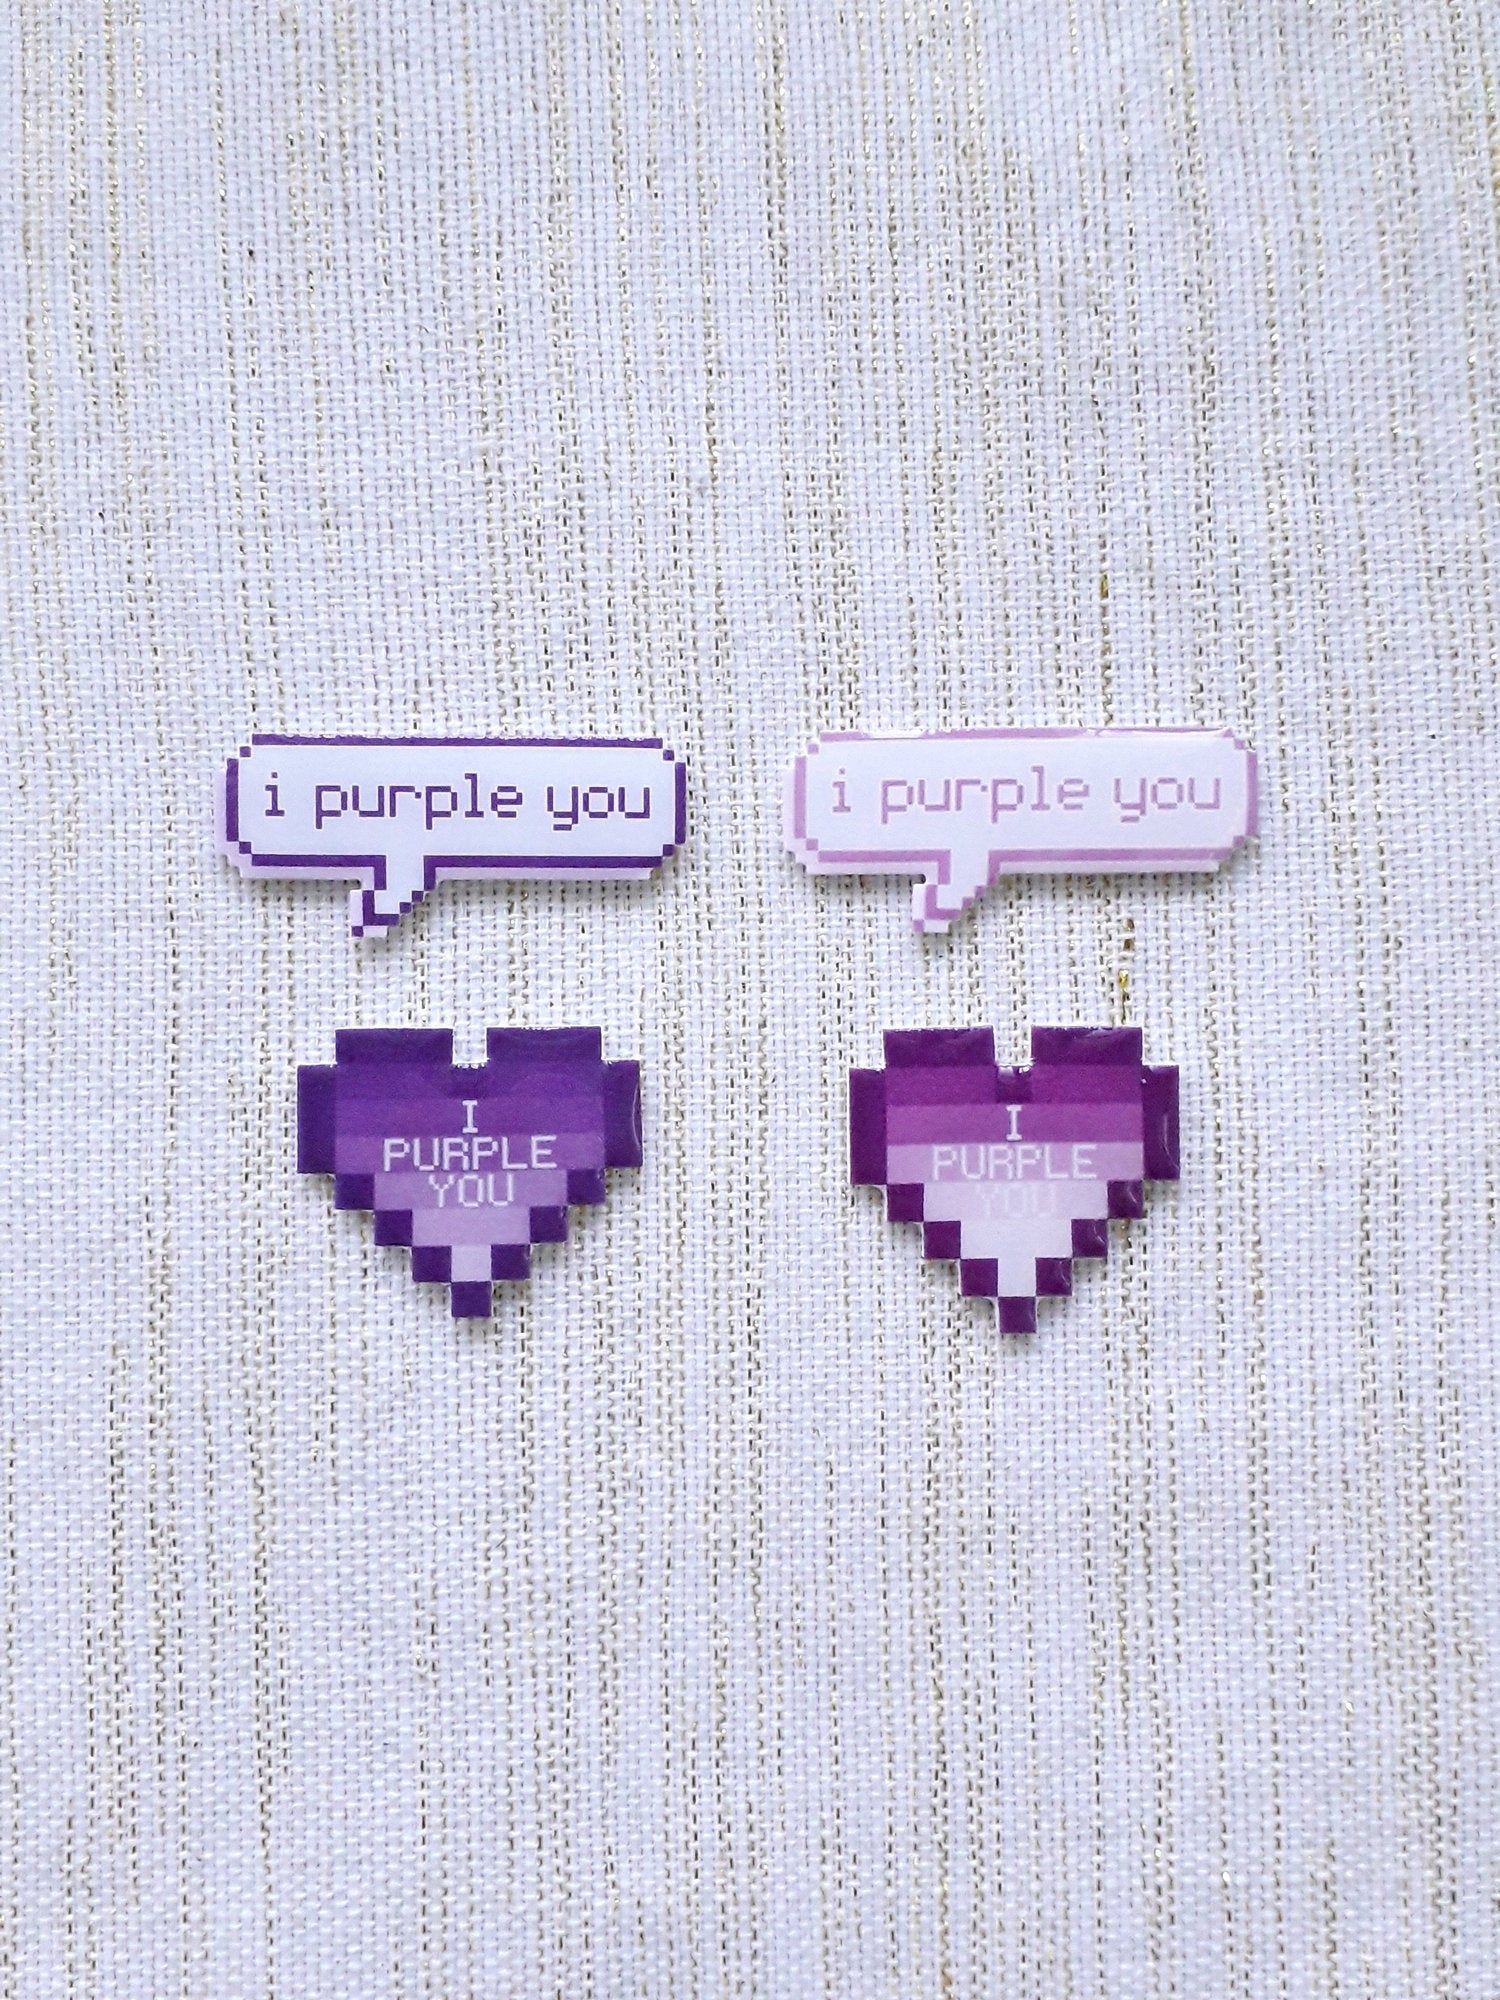 ✨10% OFF SITEWIDE (no minimum order) til Sept. 2019 only ✨ Get these I purple you pins now /2kj0Xb6 #BTS. Cute pins, Pin and patches, Purple